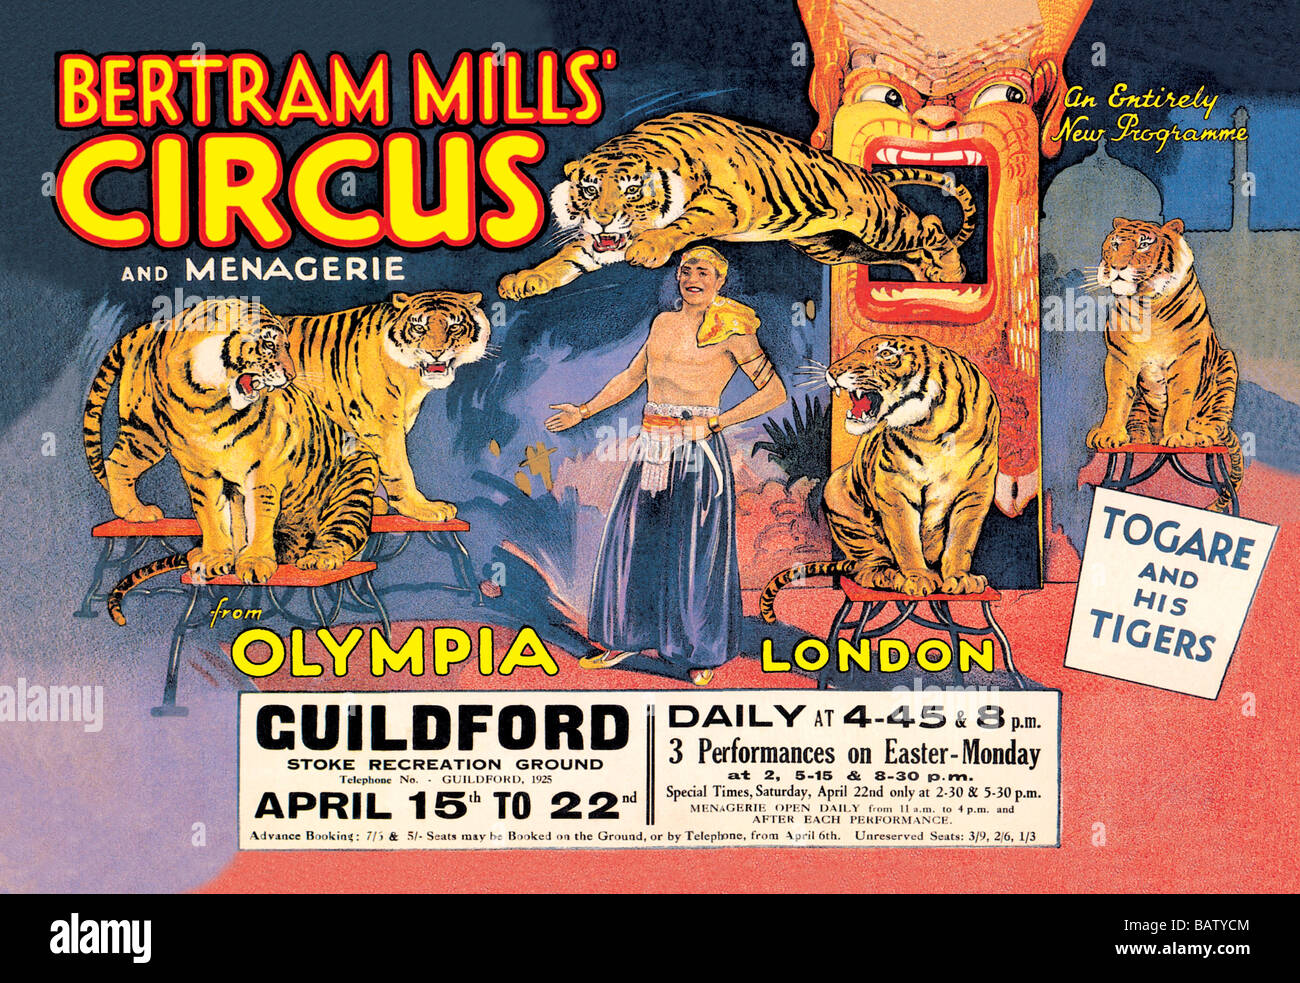 Togare and his Tigers: Bertram Mills' Circus and Menagerie Stock Photo